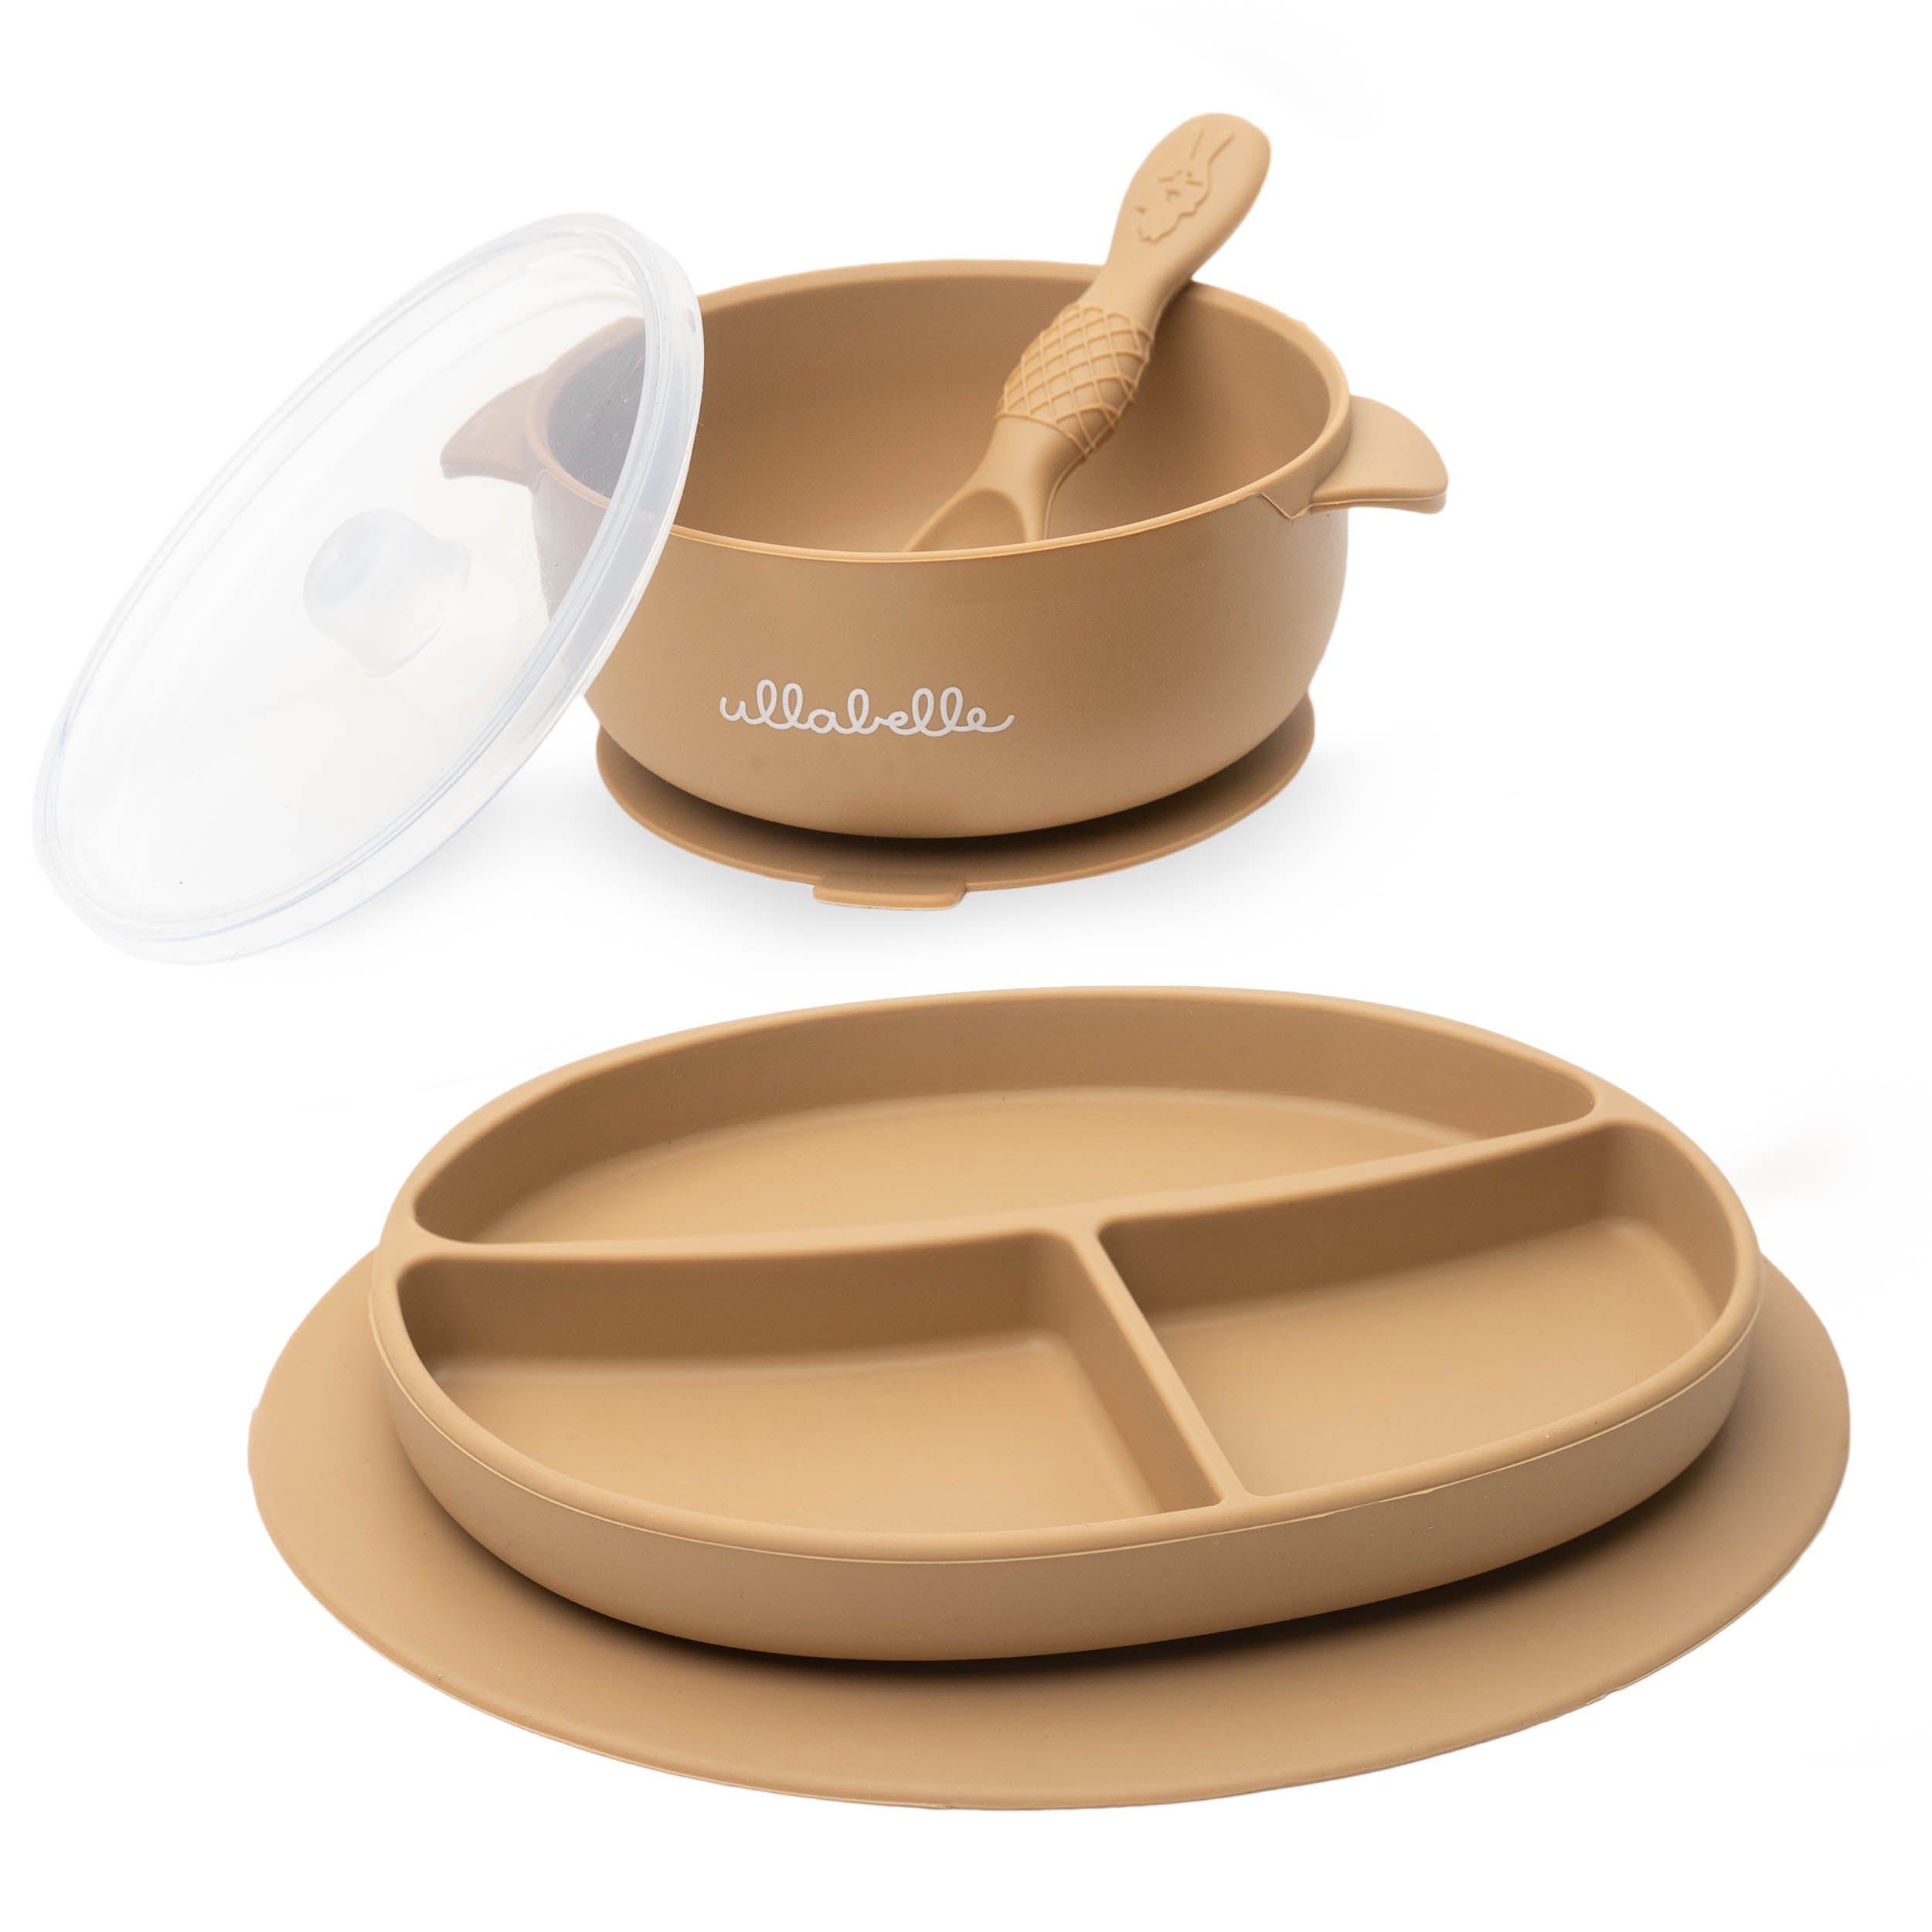 BrushinBella Baby Feeding Supplies - Complete Baby Feeding Set with Baby  Plate, Baby Spoons First Stage, Silicone Bib and Snack Cup - Infant Eating  Utensils and Baby Bowl with Suction 